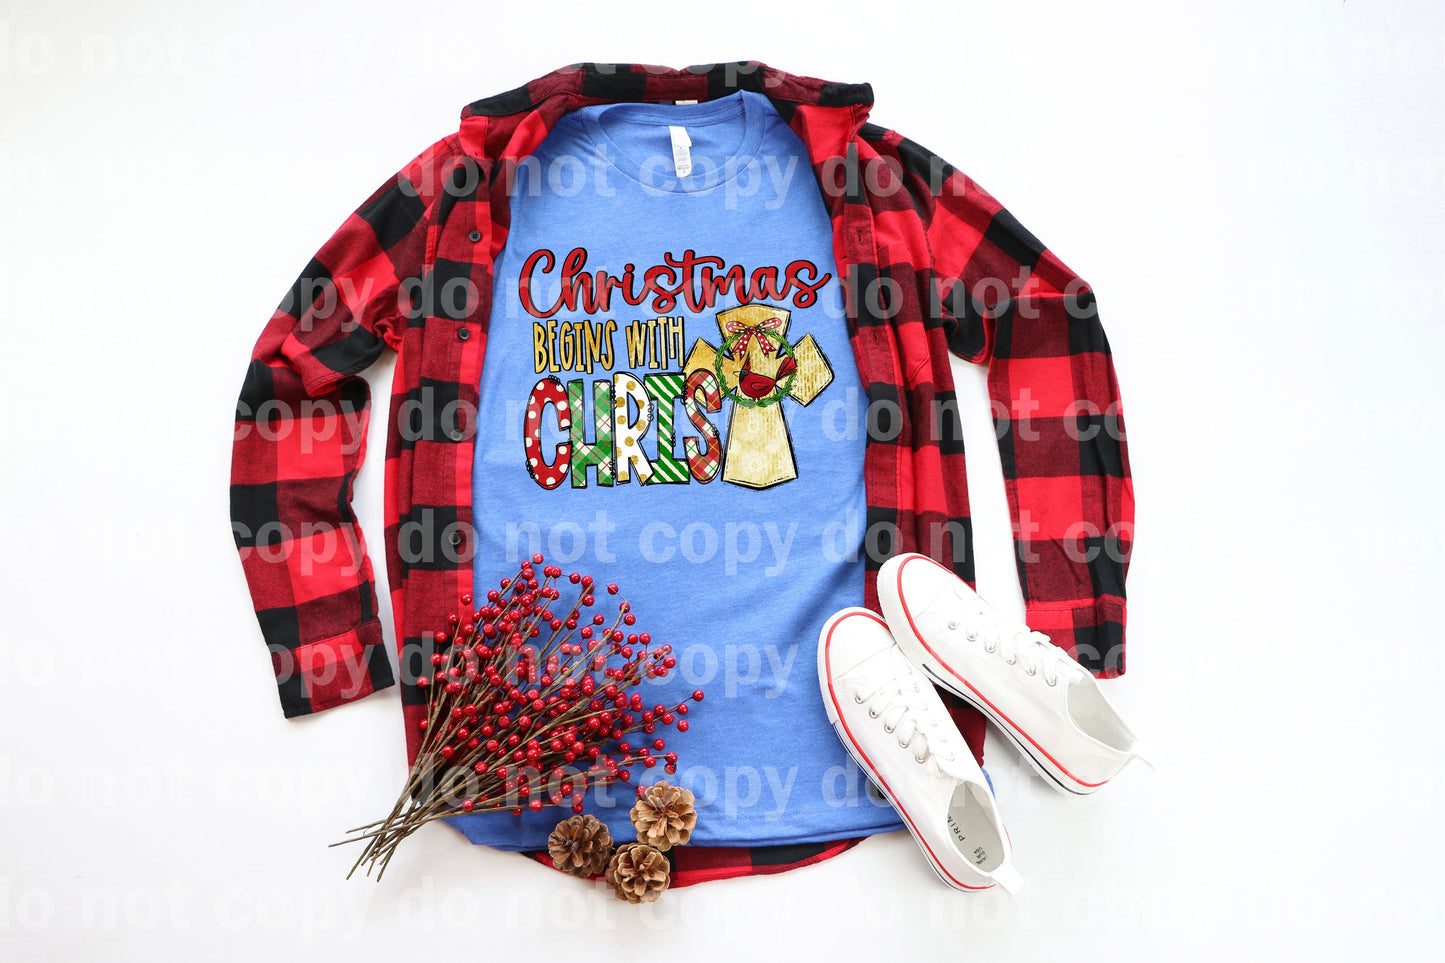 Christmas Begins With Christ Dream Print or Sublimation Print